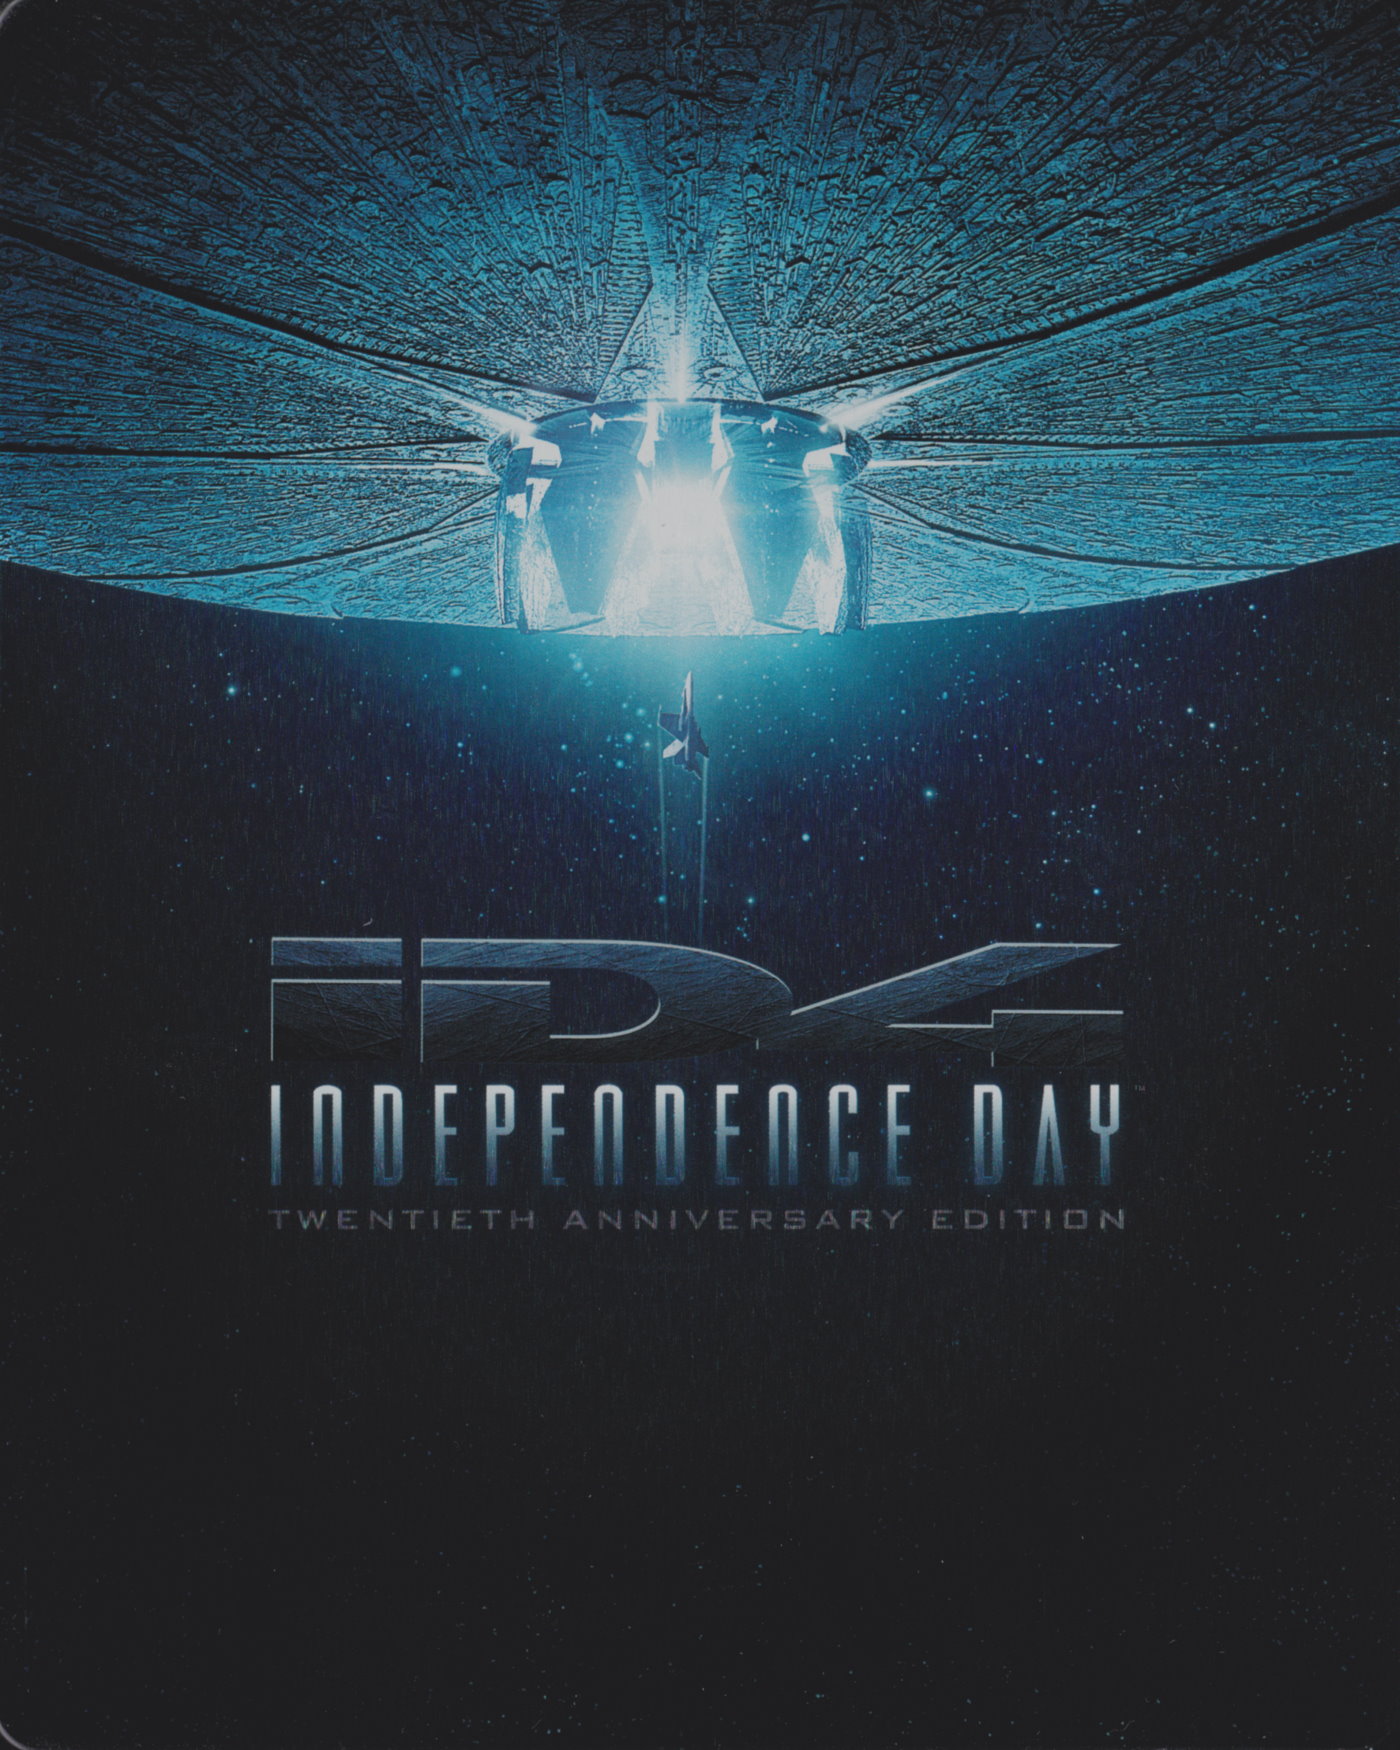 Cover - Independence Day.jpg